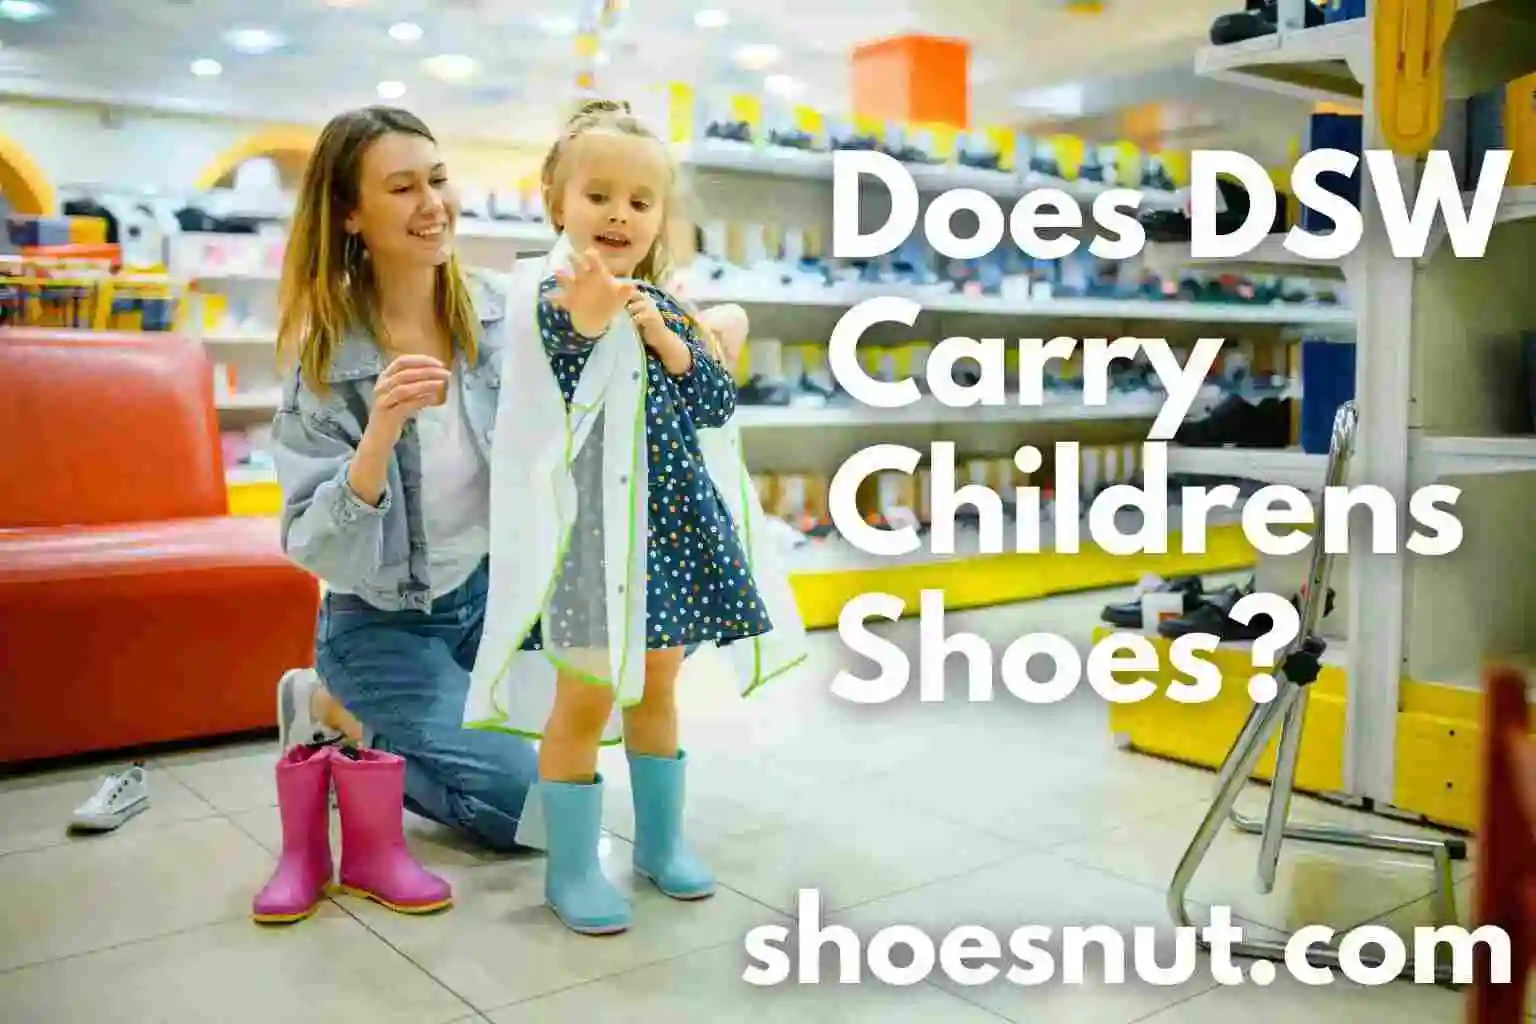 Does DSW Carry Childrens Shoes?